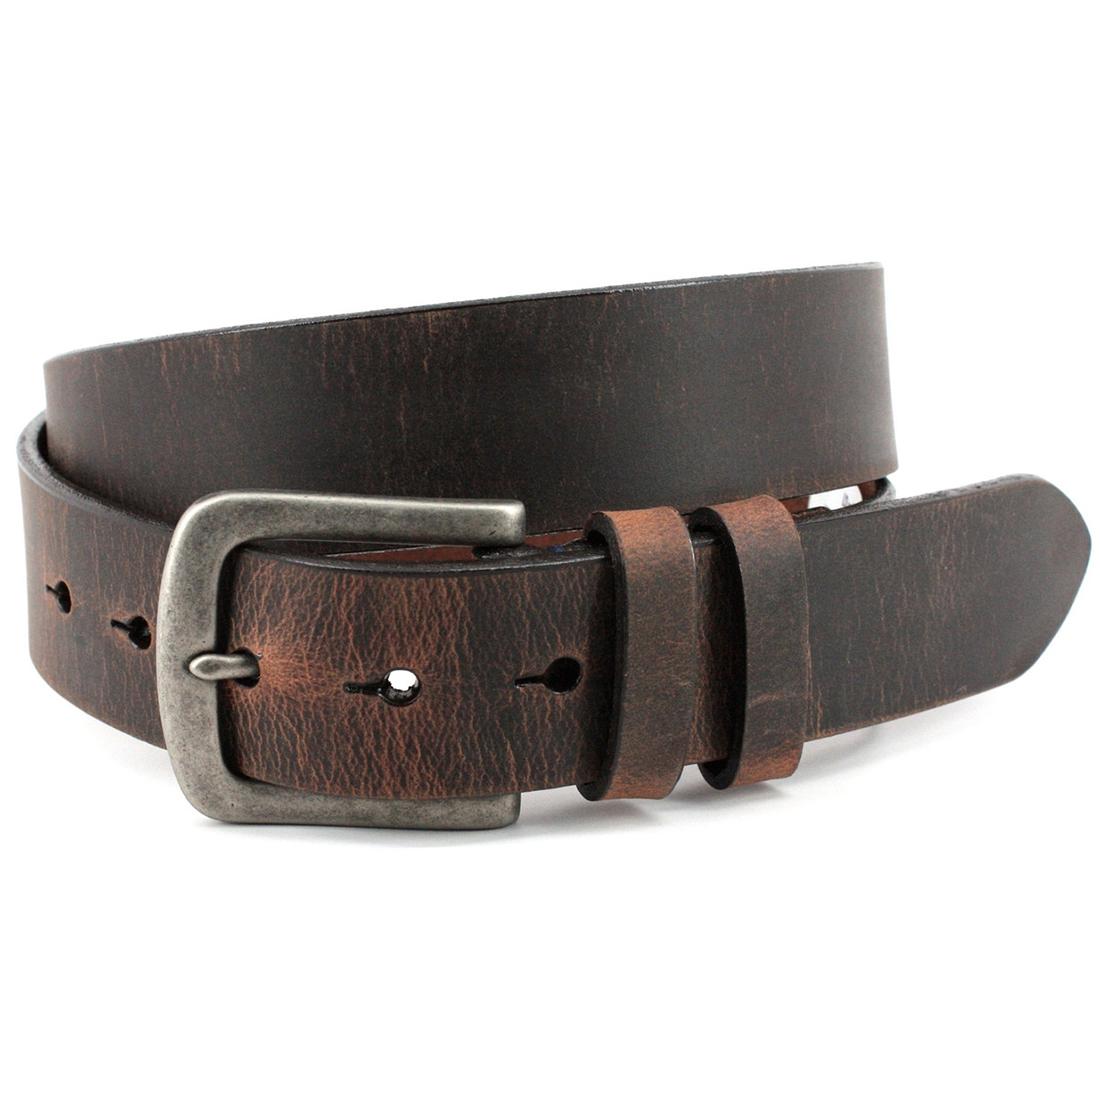  40mm Distressed Waxed Leather Belt Brown